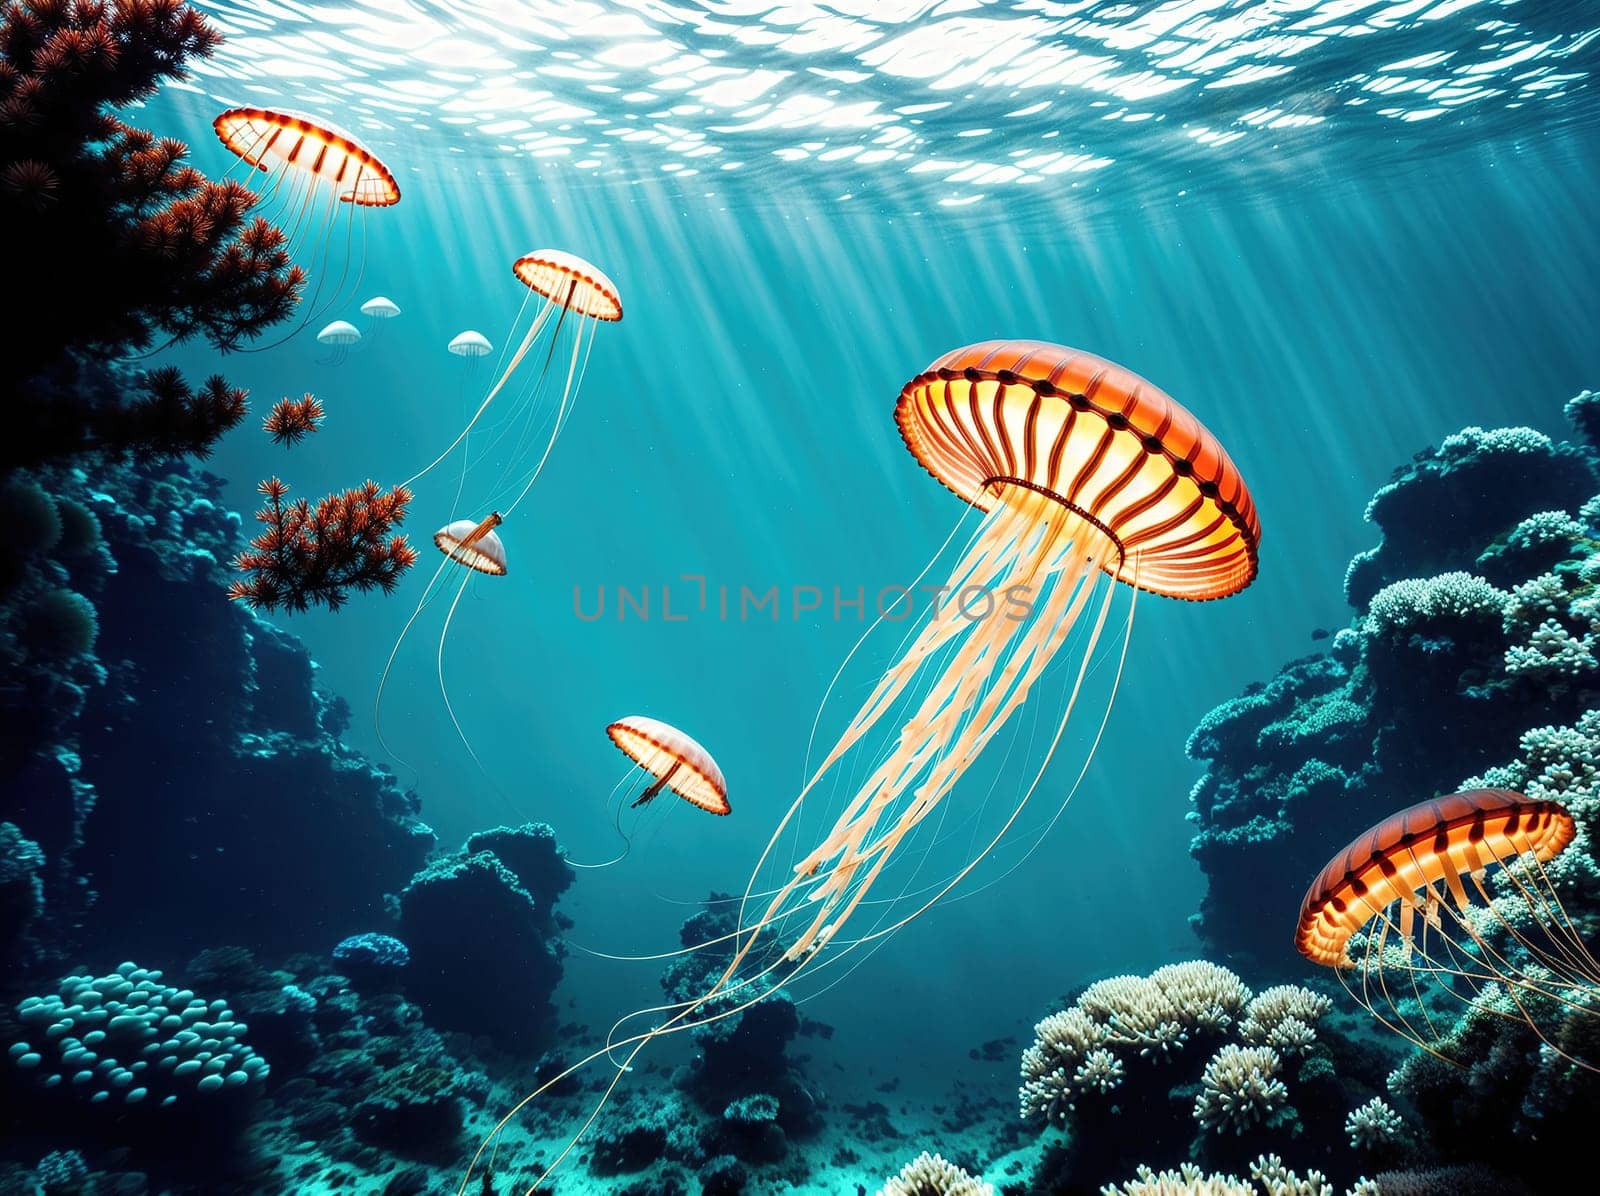 The image depicts a group of jellyfish swimming in the ocean with a coral reef in the background.